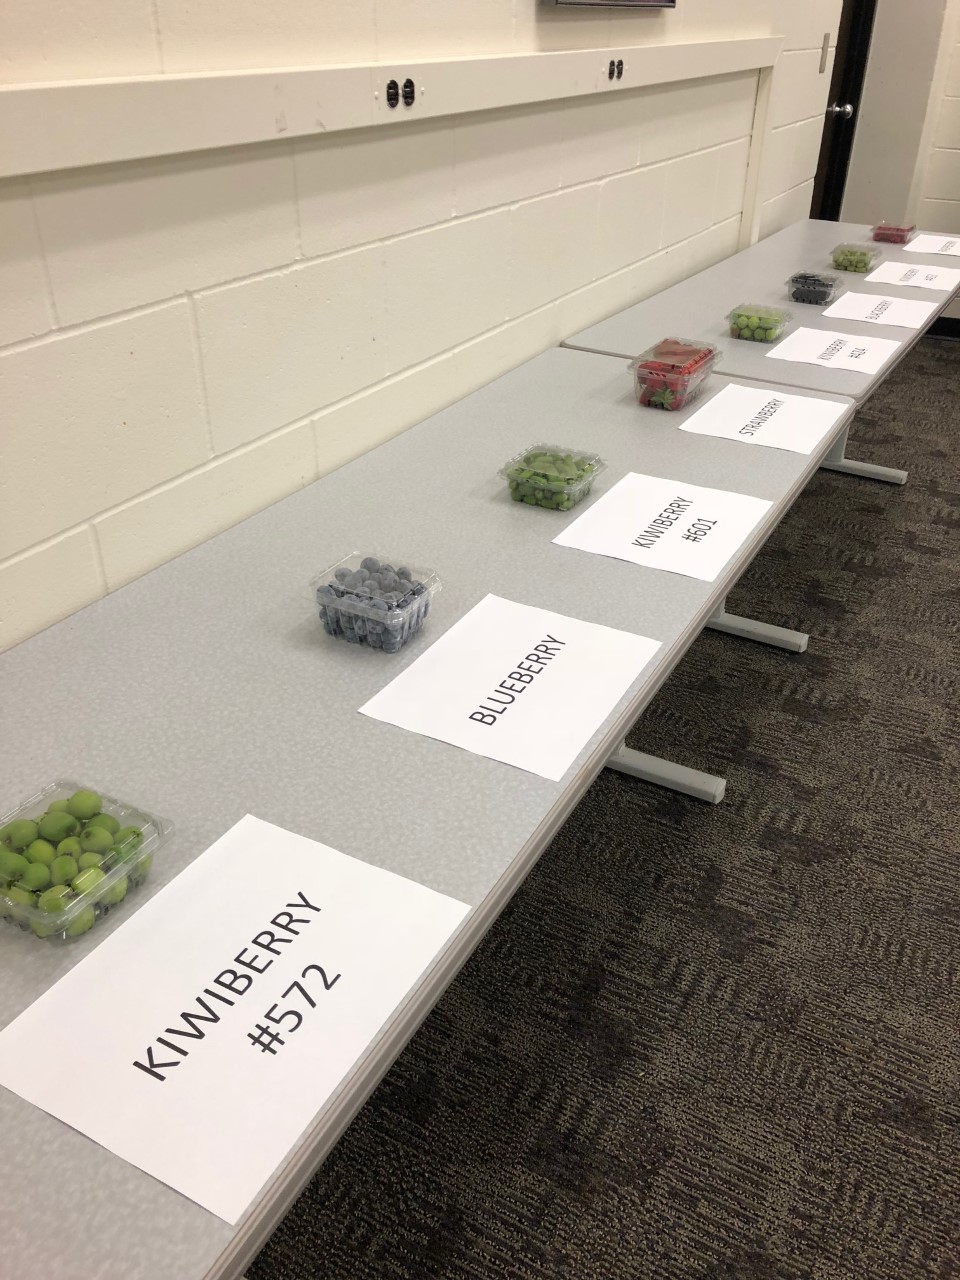 containers of fruit displayed at an experimental auction to determine market potential